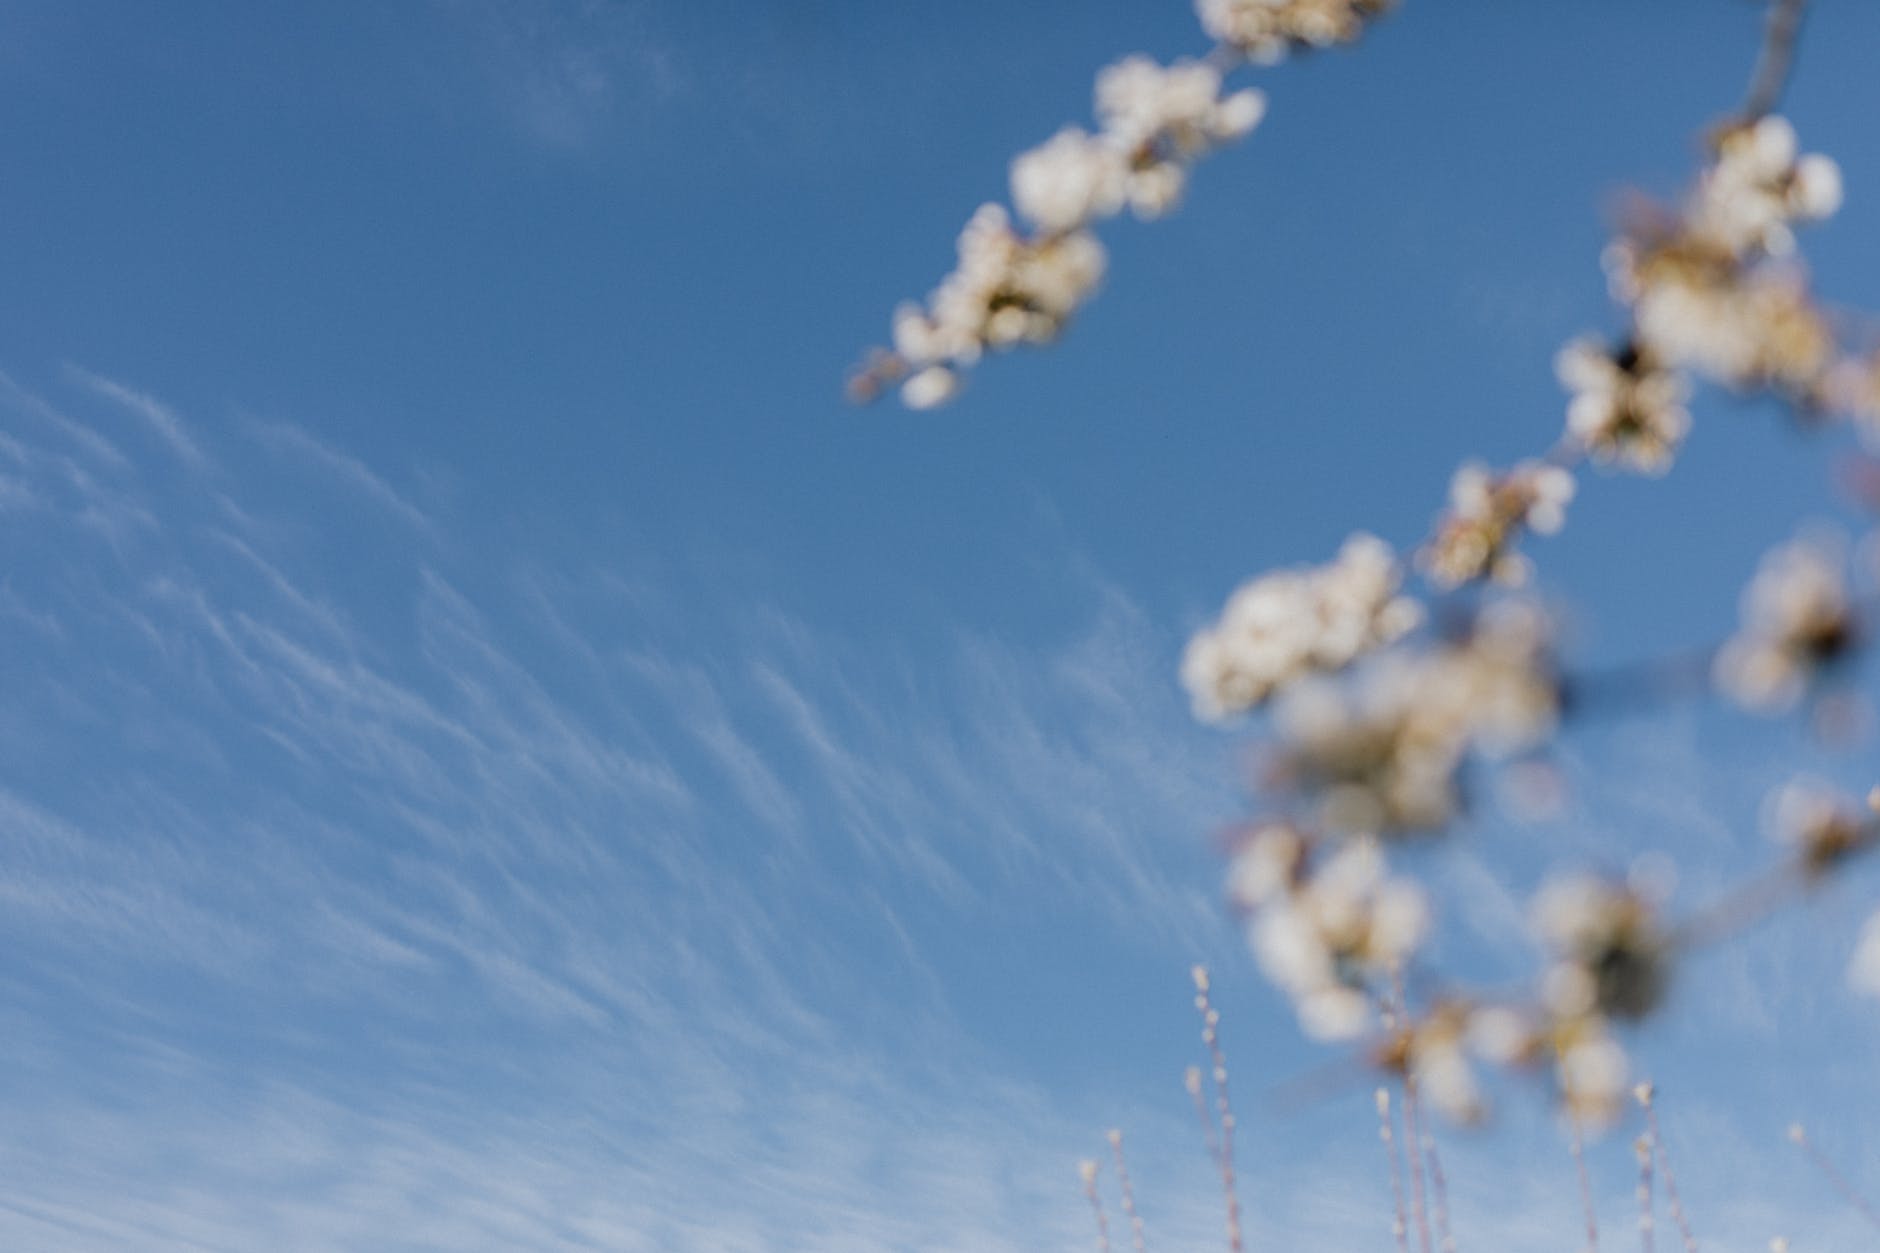 Blue spring sky with white cirrus clouds with blurred blossoming branches in foreground